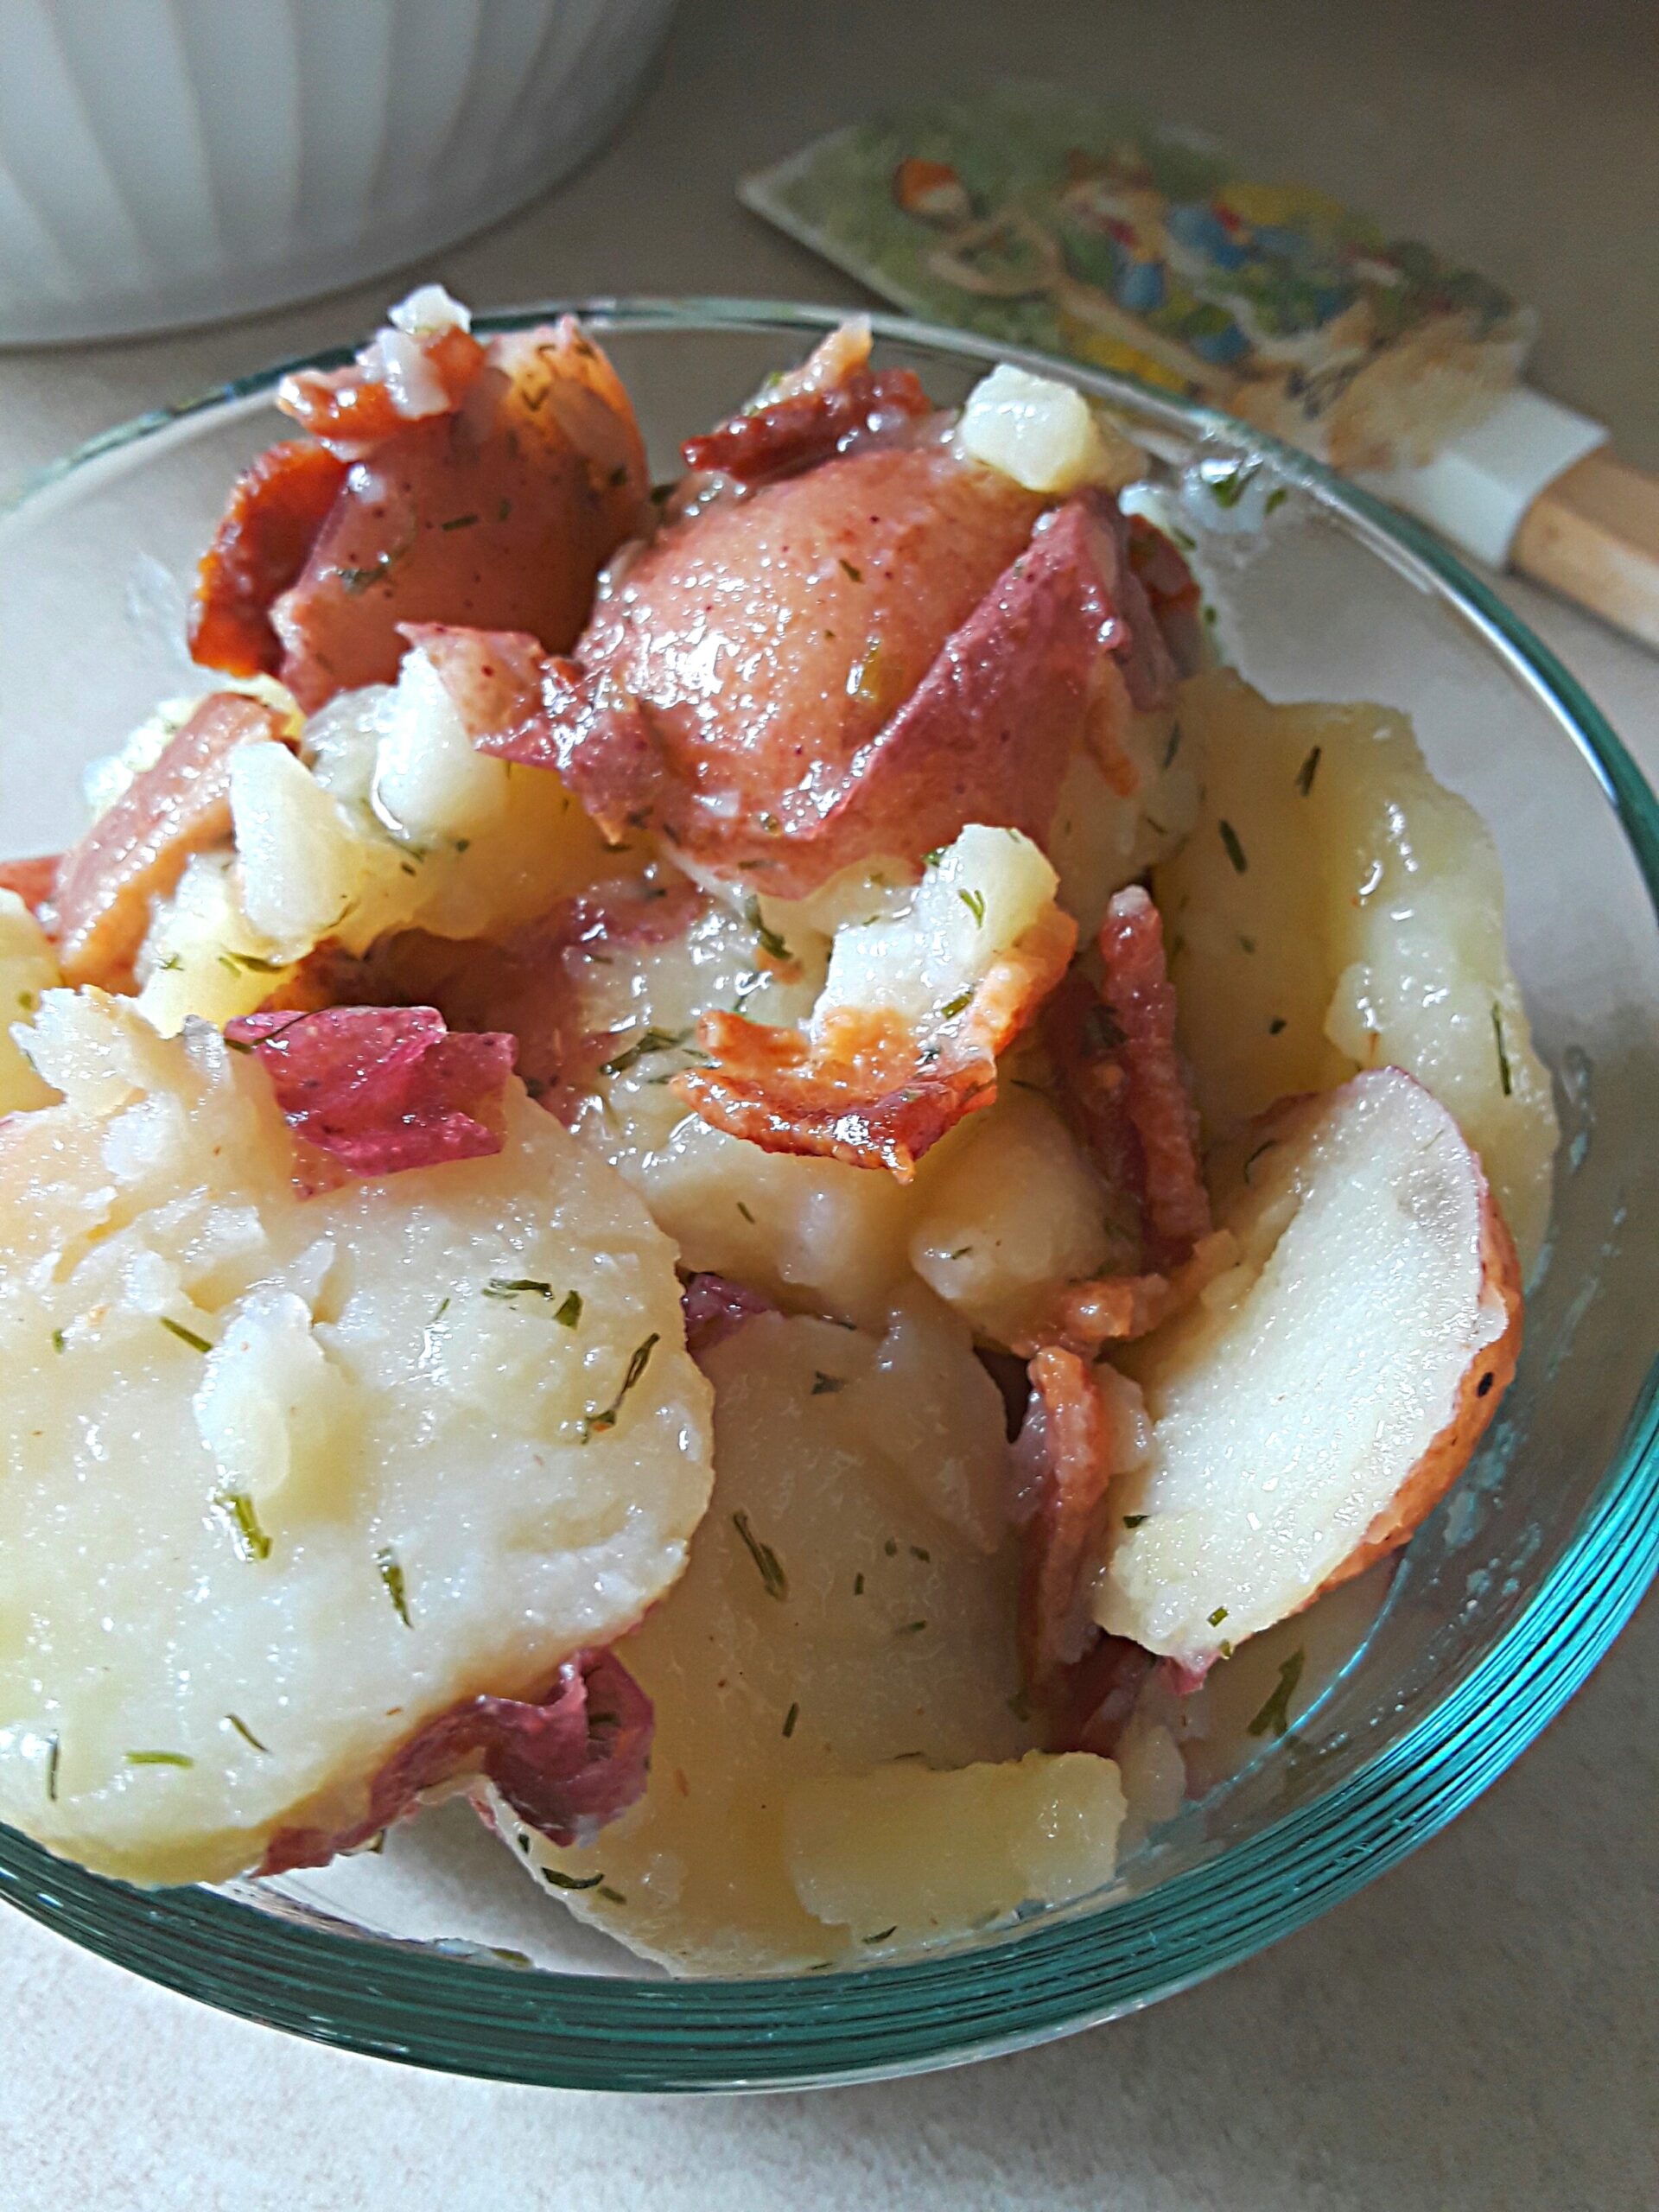 This potato salad is best served at room temperature